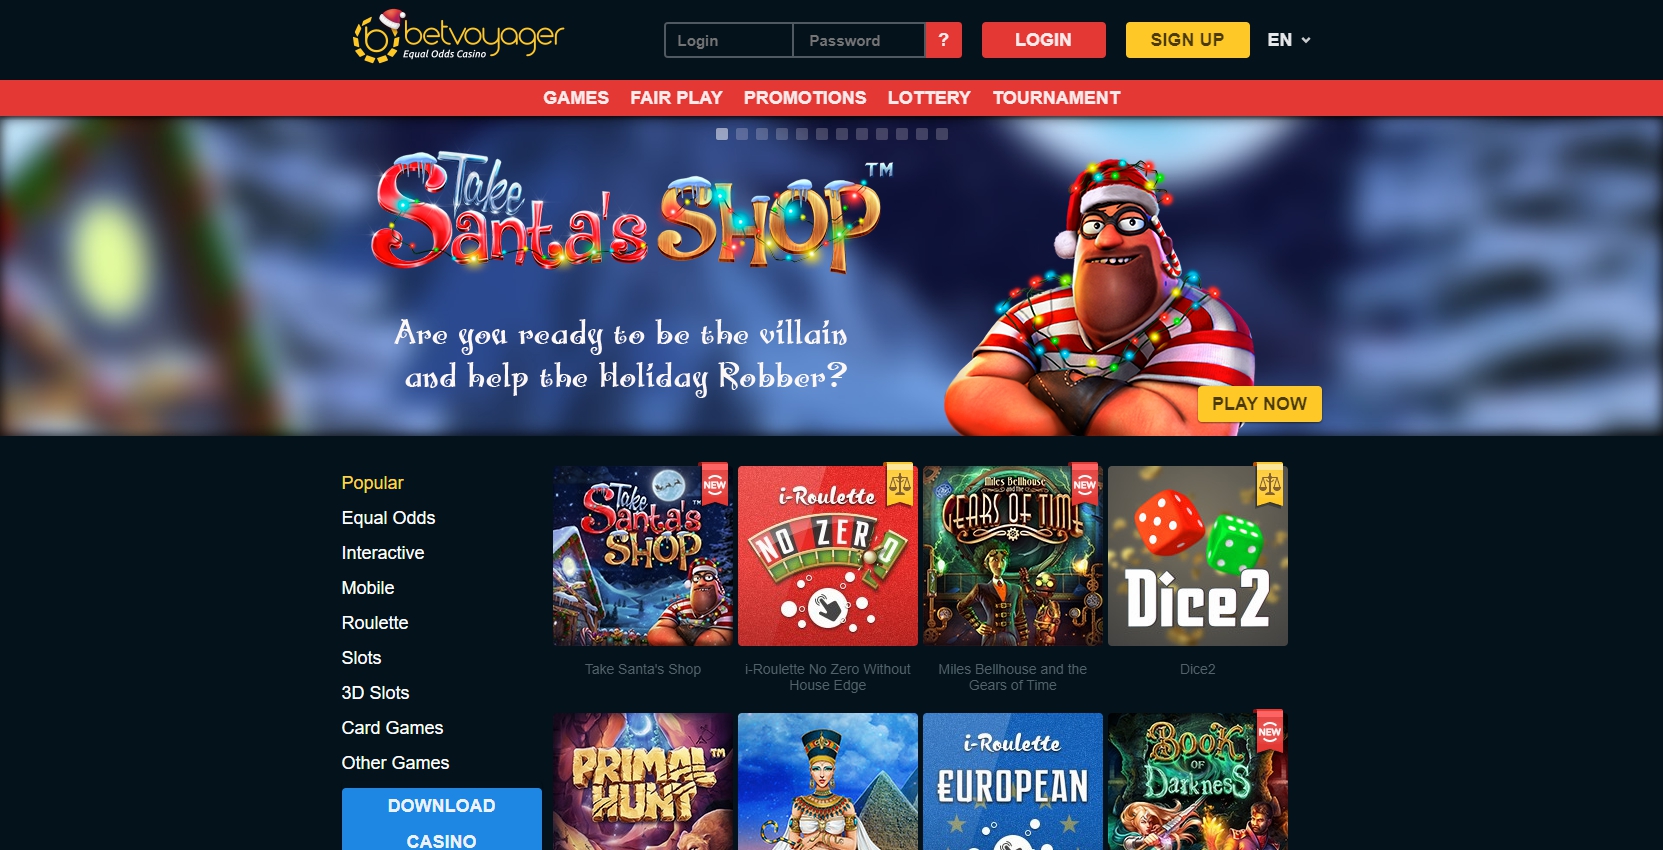 Bet Voyager Casino Review